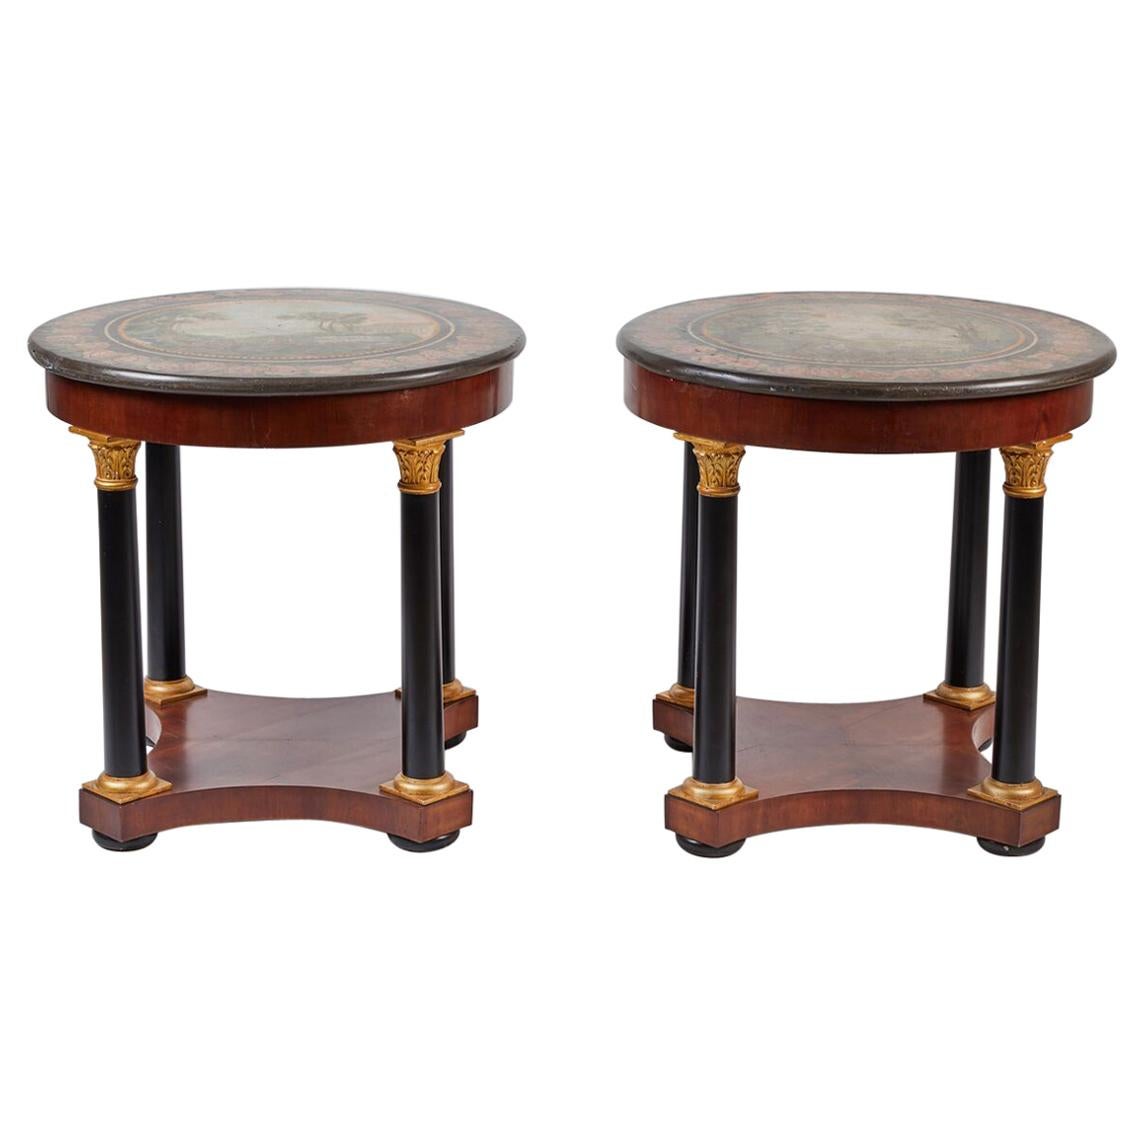 Pair of Empire Style Mahogany Ebonized Gueridon with Parcel-Gilt Details For Sale